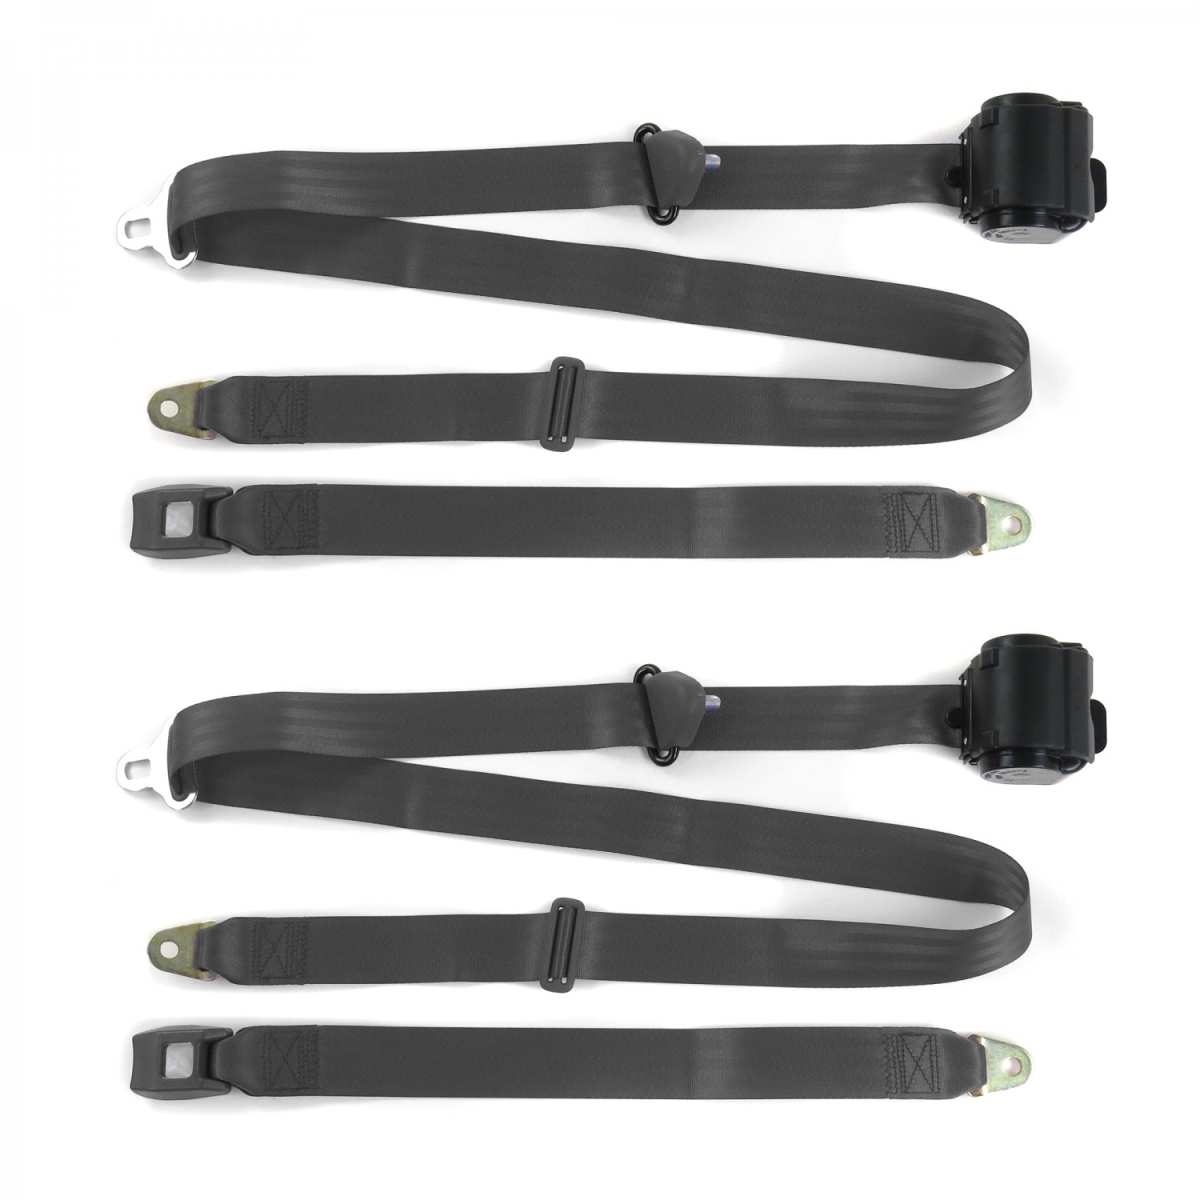 670053 3 Point Standard Retractable Bucket Seat Belt Kit with 2 Belts for 1955-1957 Ford Thunderbird, Charcoal -  safeTboy